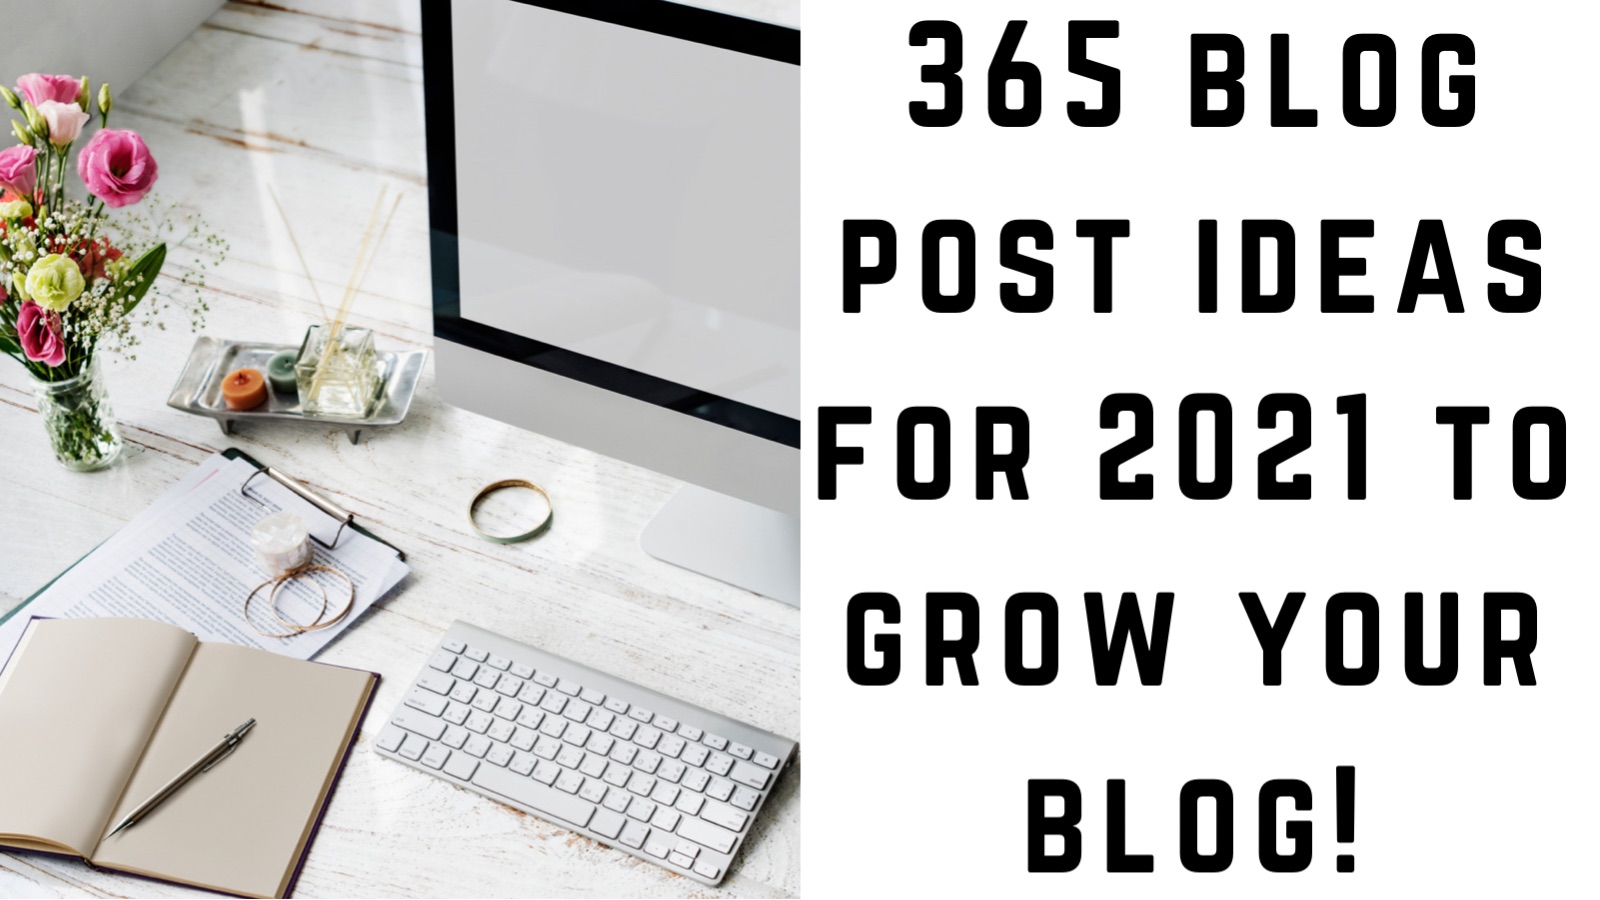 365 blog post ideas for 2021 to grow your blog!